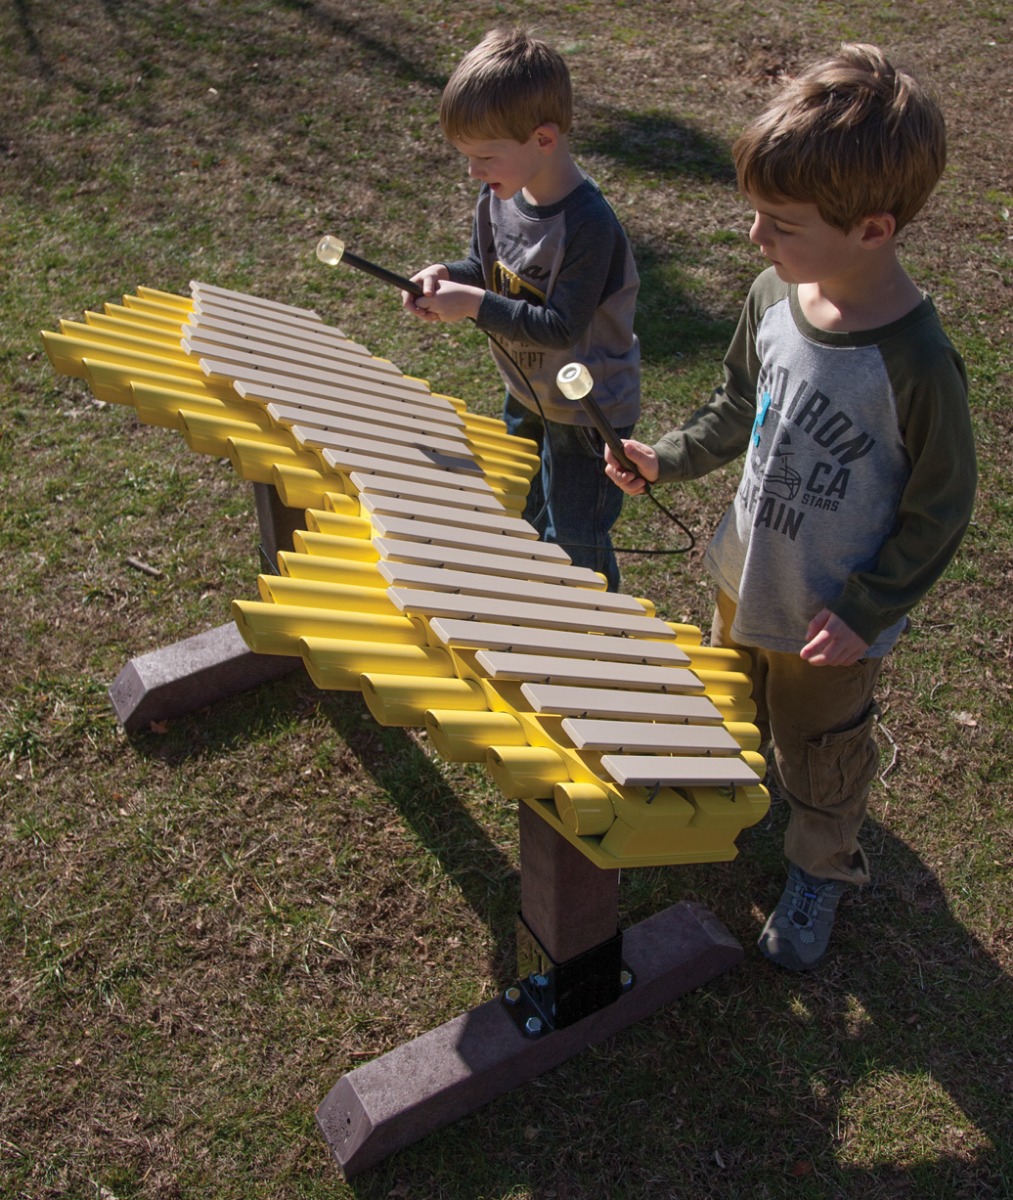 Imbarimba - Outdoor Musical Instruments - All People Can Play